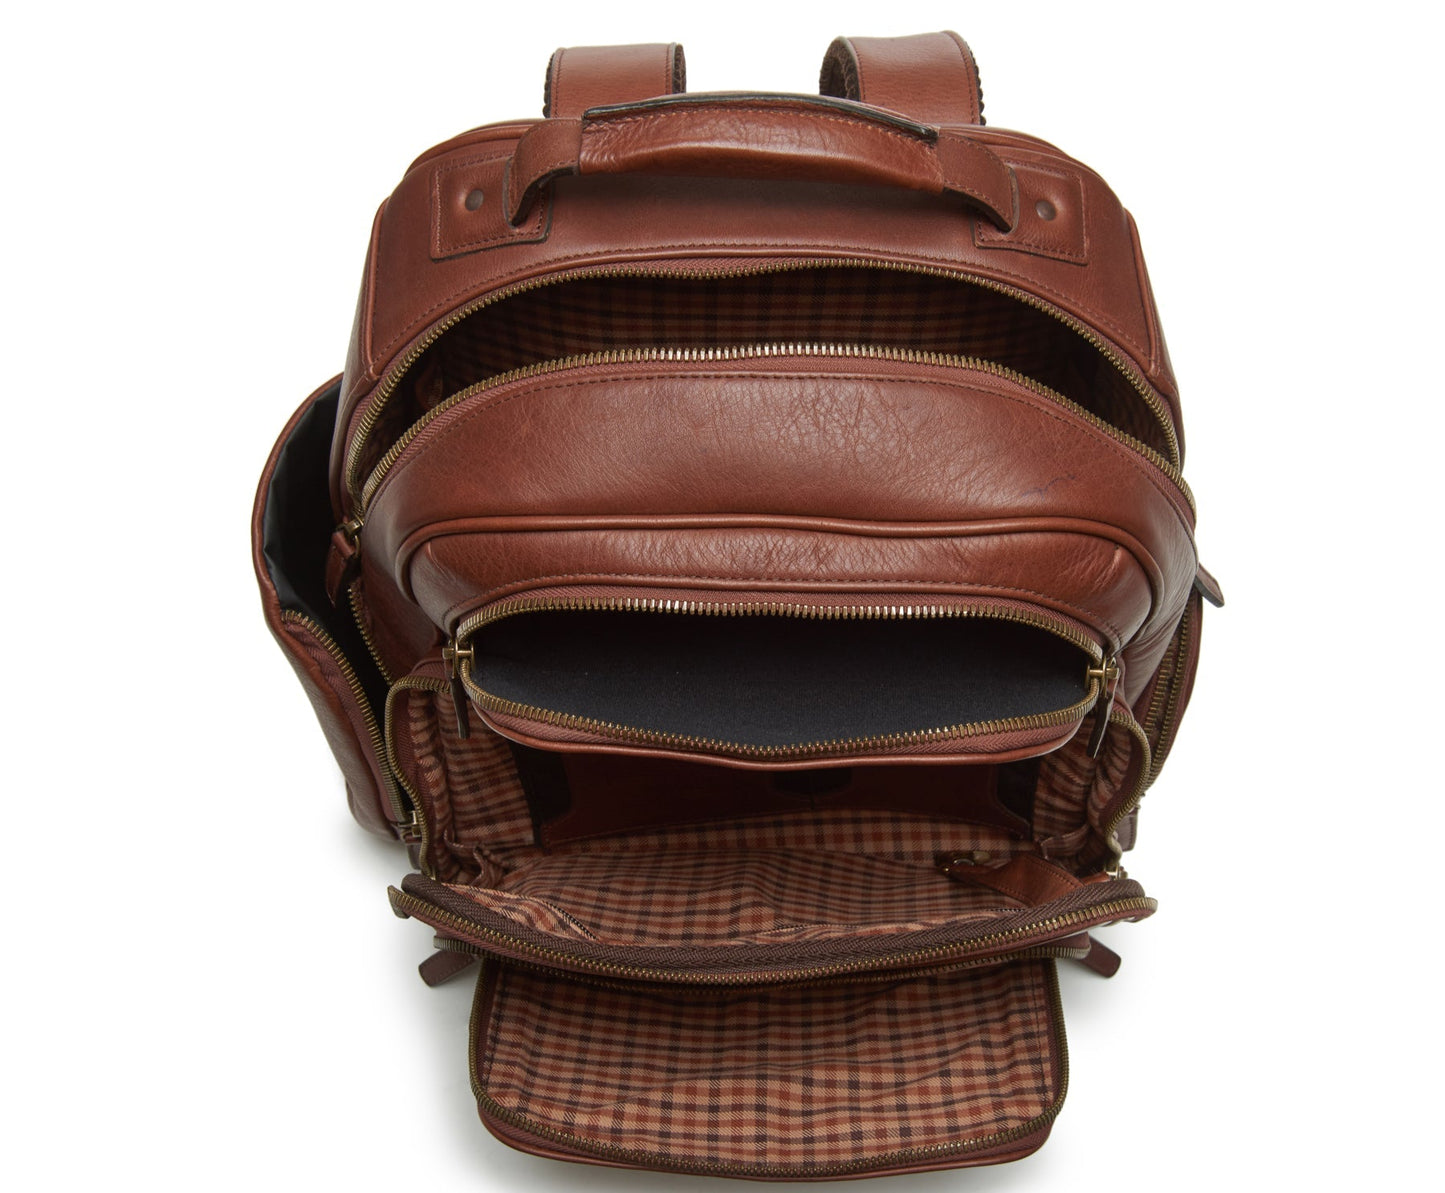 Mason Espresso Brown Leather Leather Backpack | Espresso Brown Leather Backpack  | Made in USA | Korchmar | Z1254ES